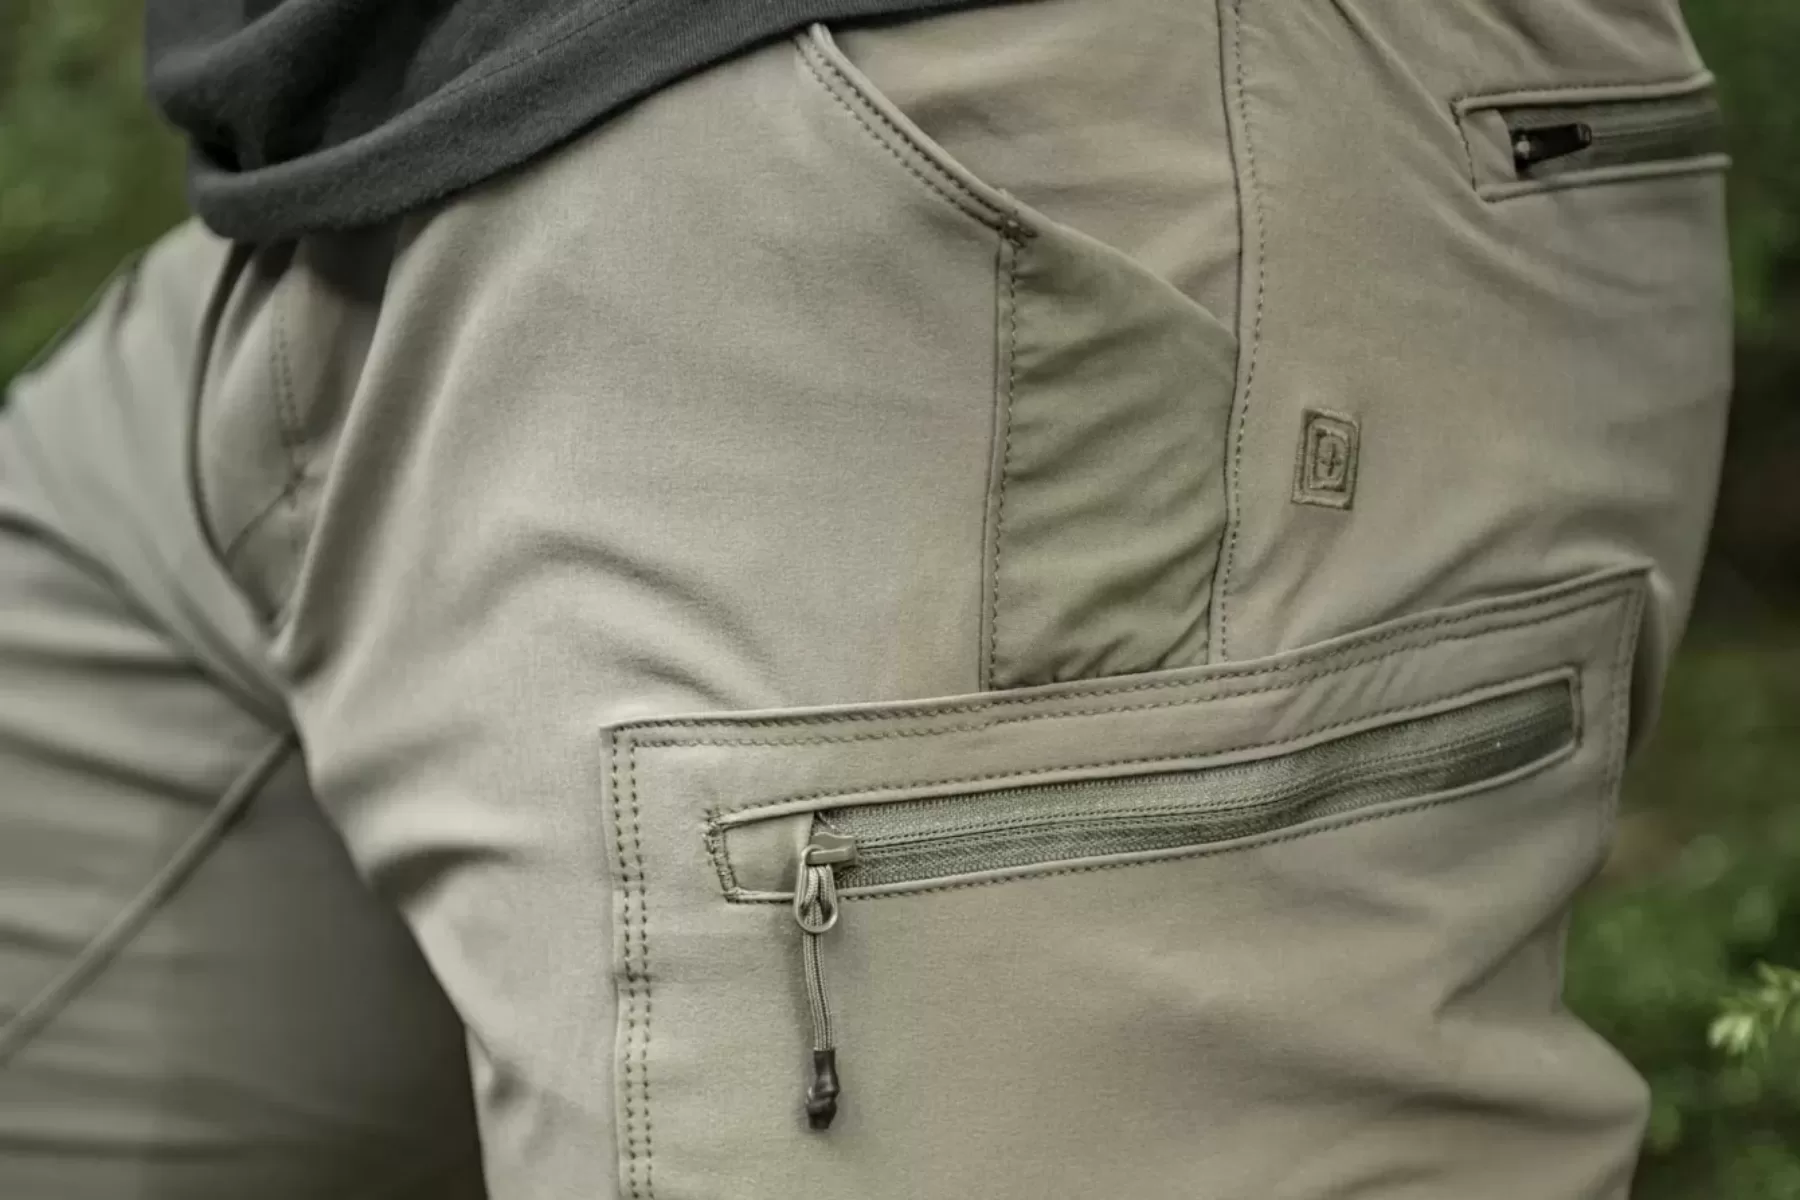 What are tactical pants?